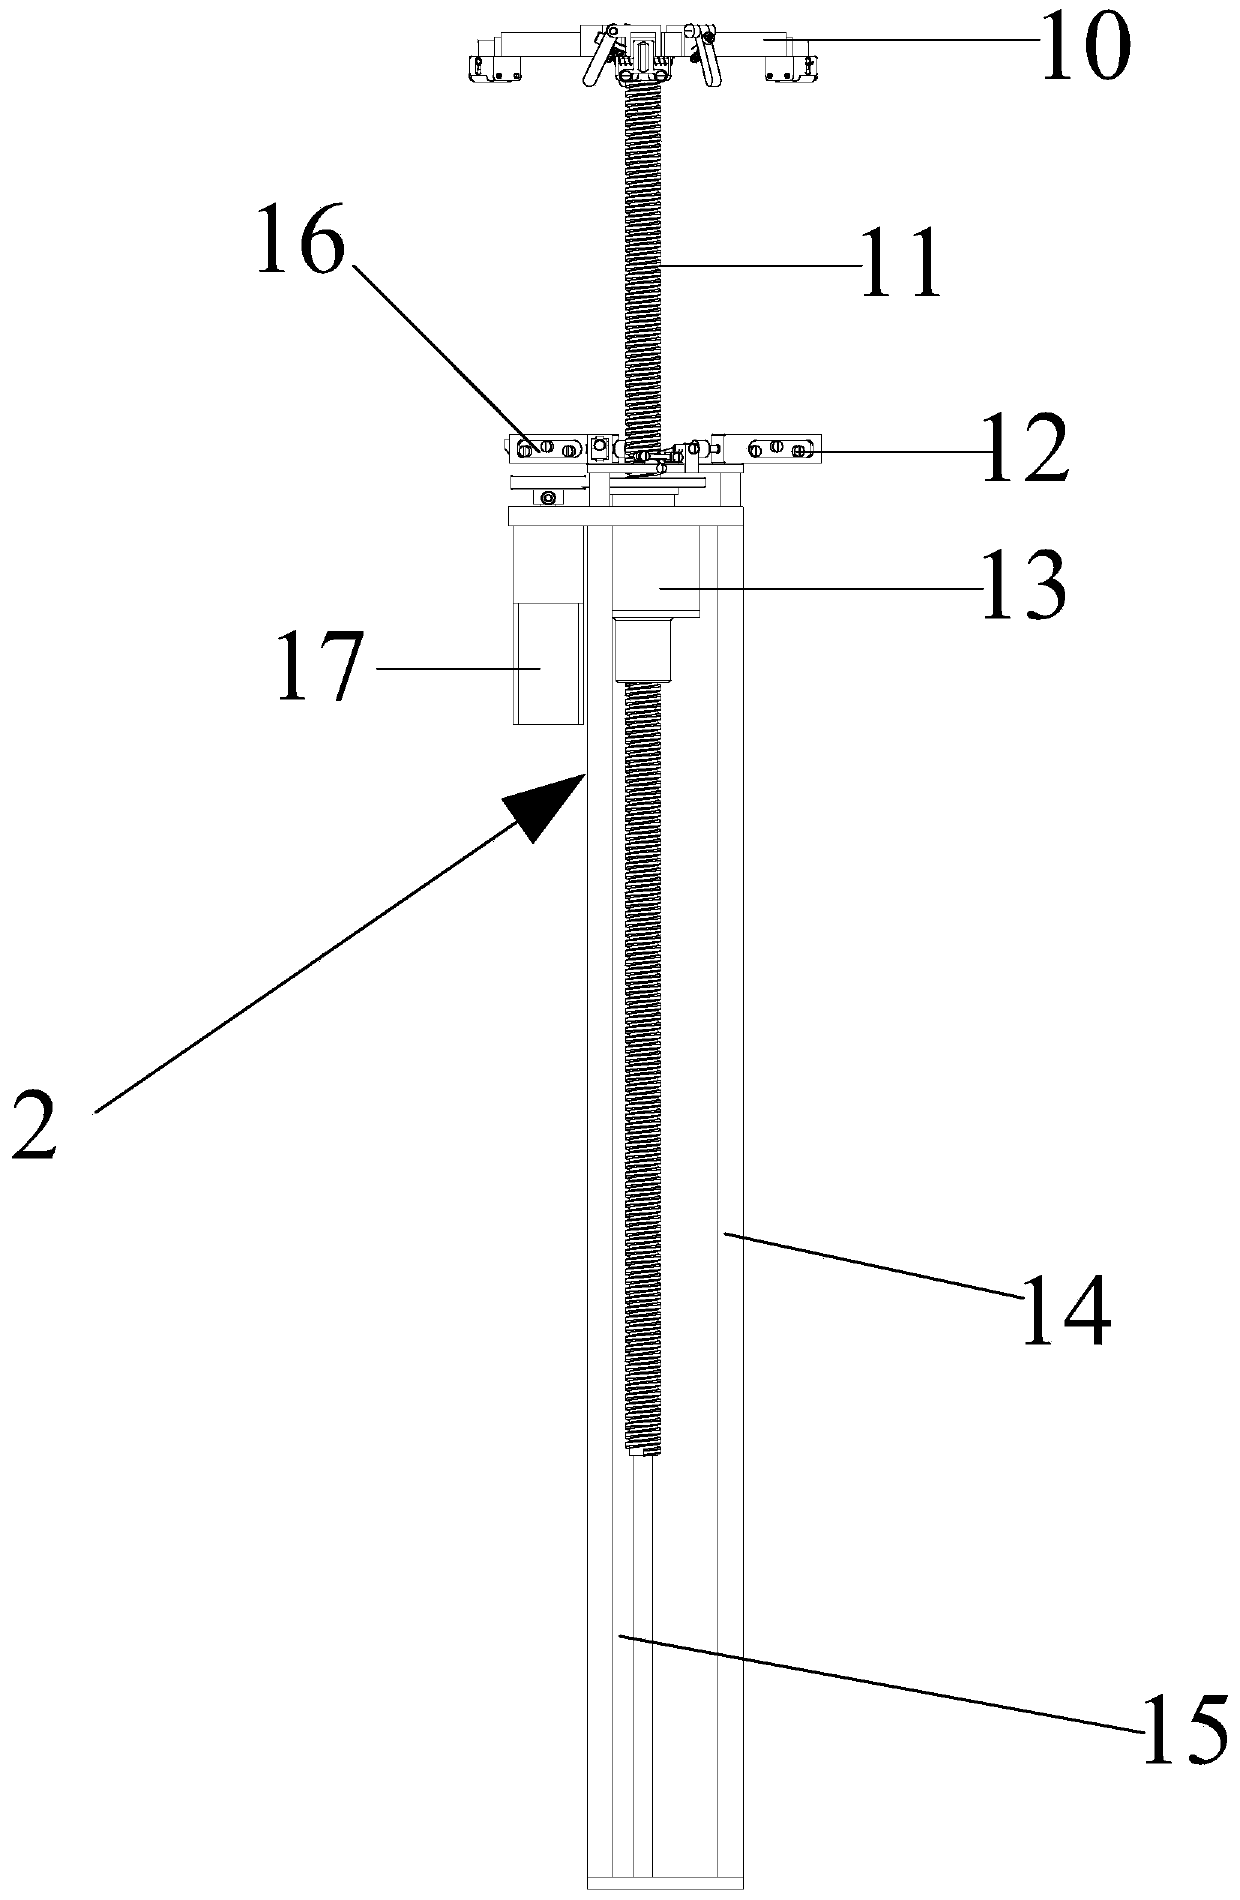 Controllable deployment truss device with high storage ratio applied to spacecraft